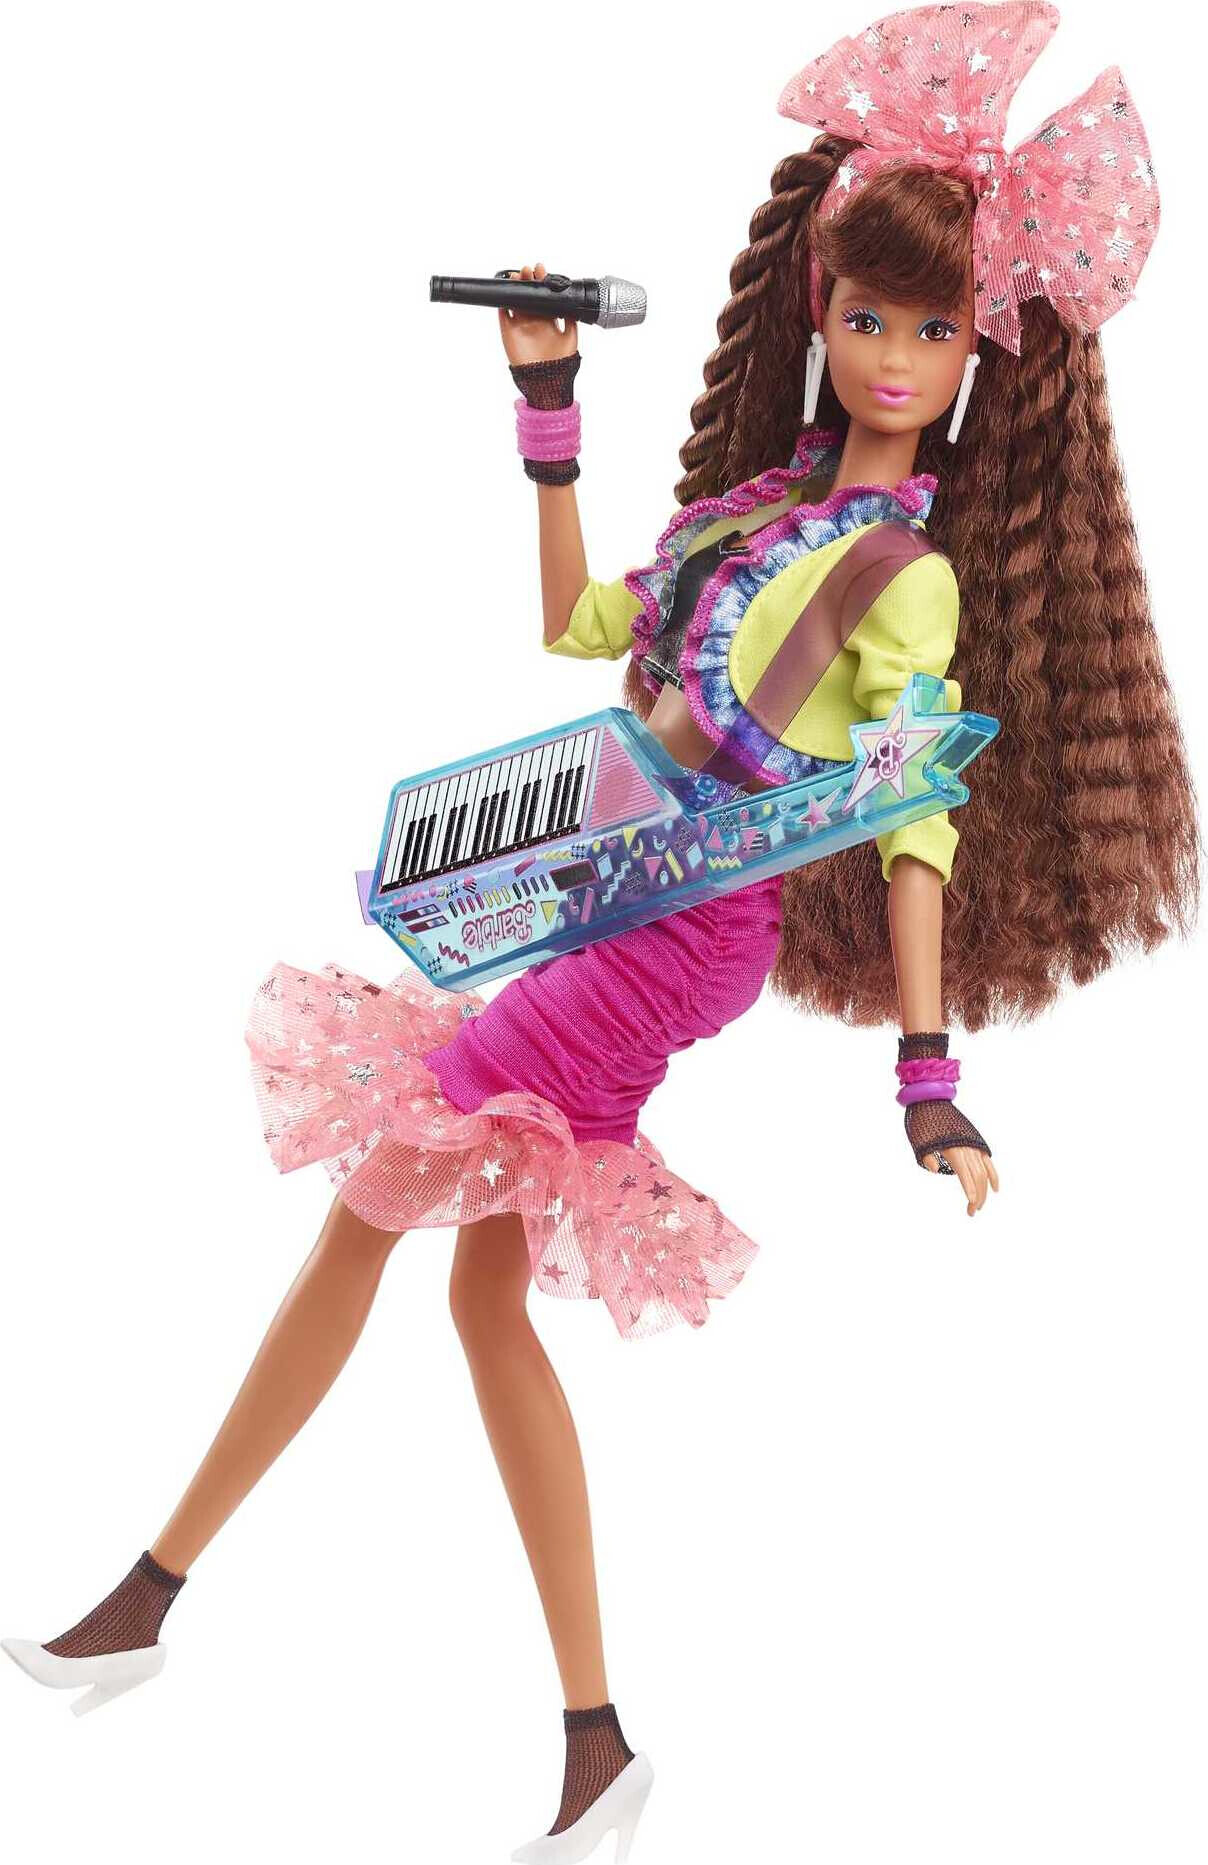 Barbie Rewind '80s Edition Collectible Doll with Night Out Look & Music Accessories - image 3 of 7